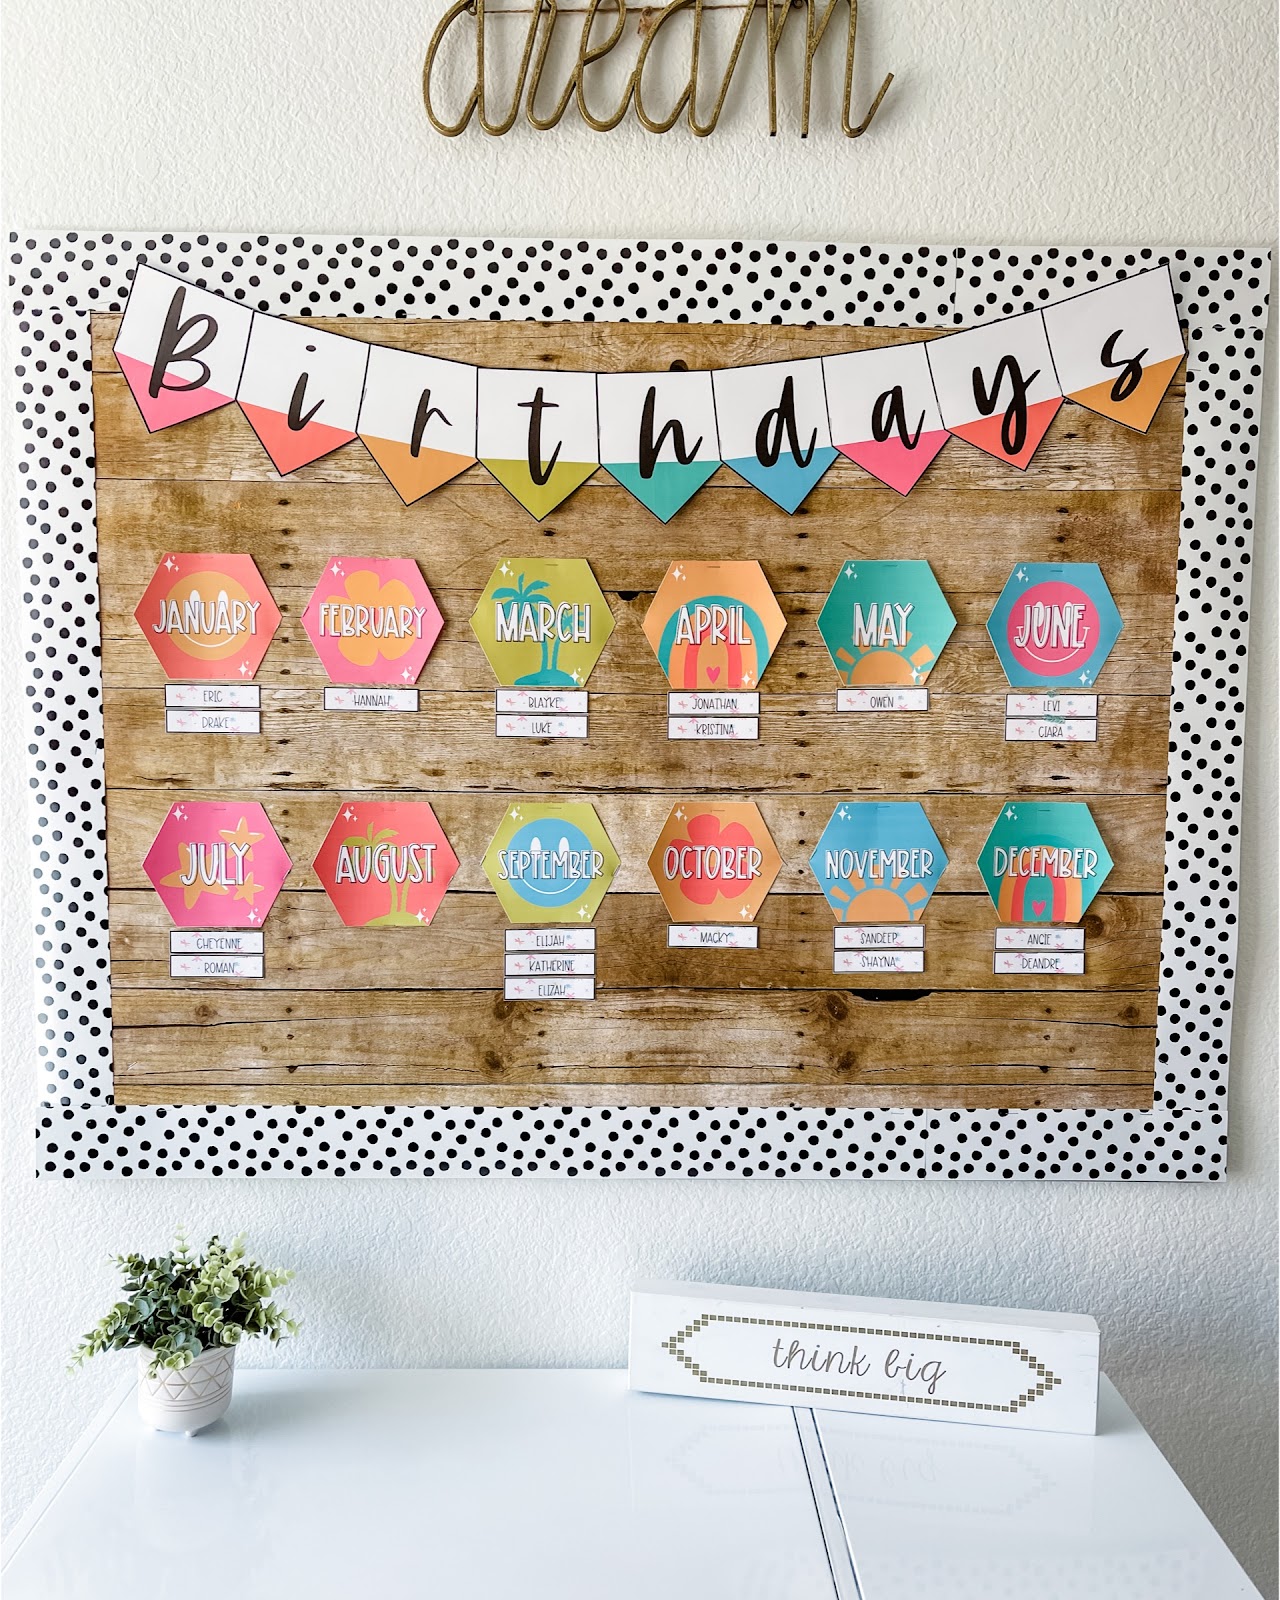 This image shows a birthday display on a bulletin board display. There is a card for each month of the year with smaller cards for student names underneath. The month cards are brightly colored and have tropical-themed icons for decoration. 